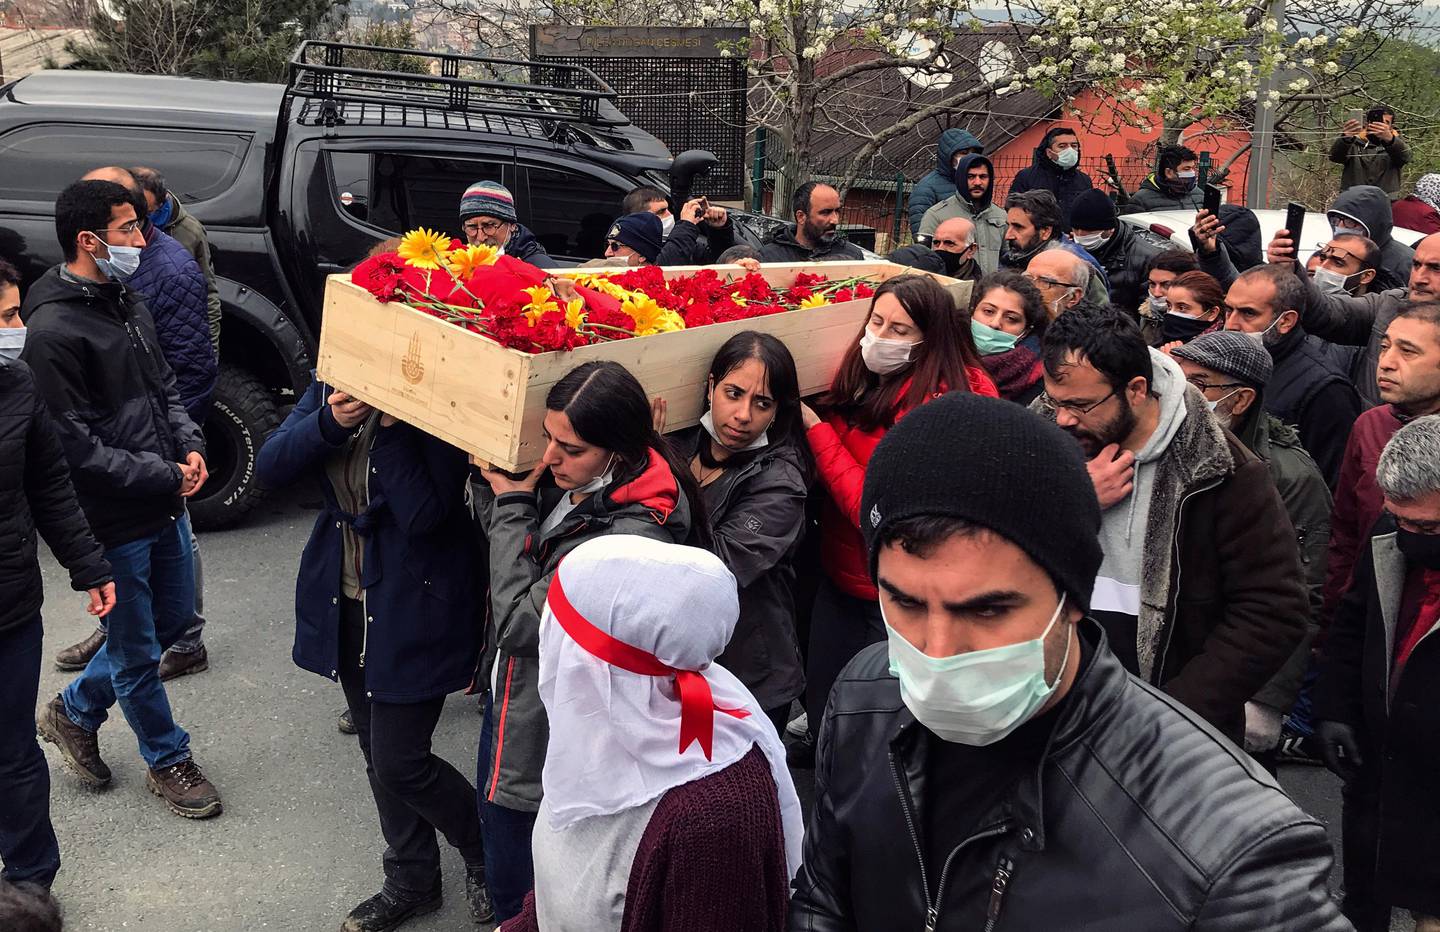 Mourners carry the open coffin of Helin Bolek, a member of a popular folk music group that is banned in Turkey, during the funeral procession in Istanbul, Friday, April 3, 2020. Bolek died at home Friday on the 288th day of a hunger strike protesting the government's treatment of the band, in an effort to force the government to reverse its treatment of the band and its members. She was 28. Grup Yorum, known for its protest songs, is a folk collective with rotating band members, the government accuses the group of links to the outlawed Revolutionary People's Liberation Party-Front, or DHKP/C. (Ibrahim Mase/DHA via AP)